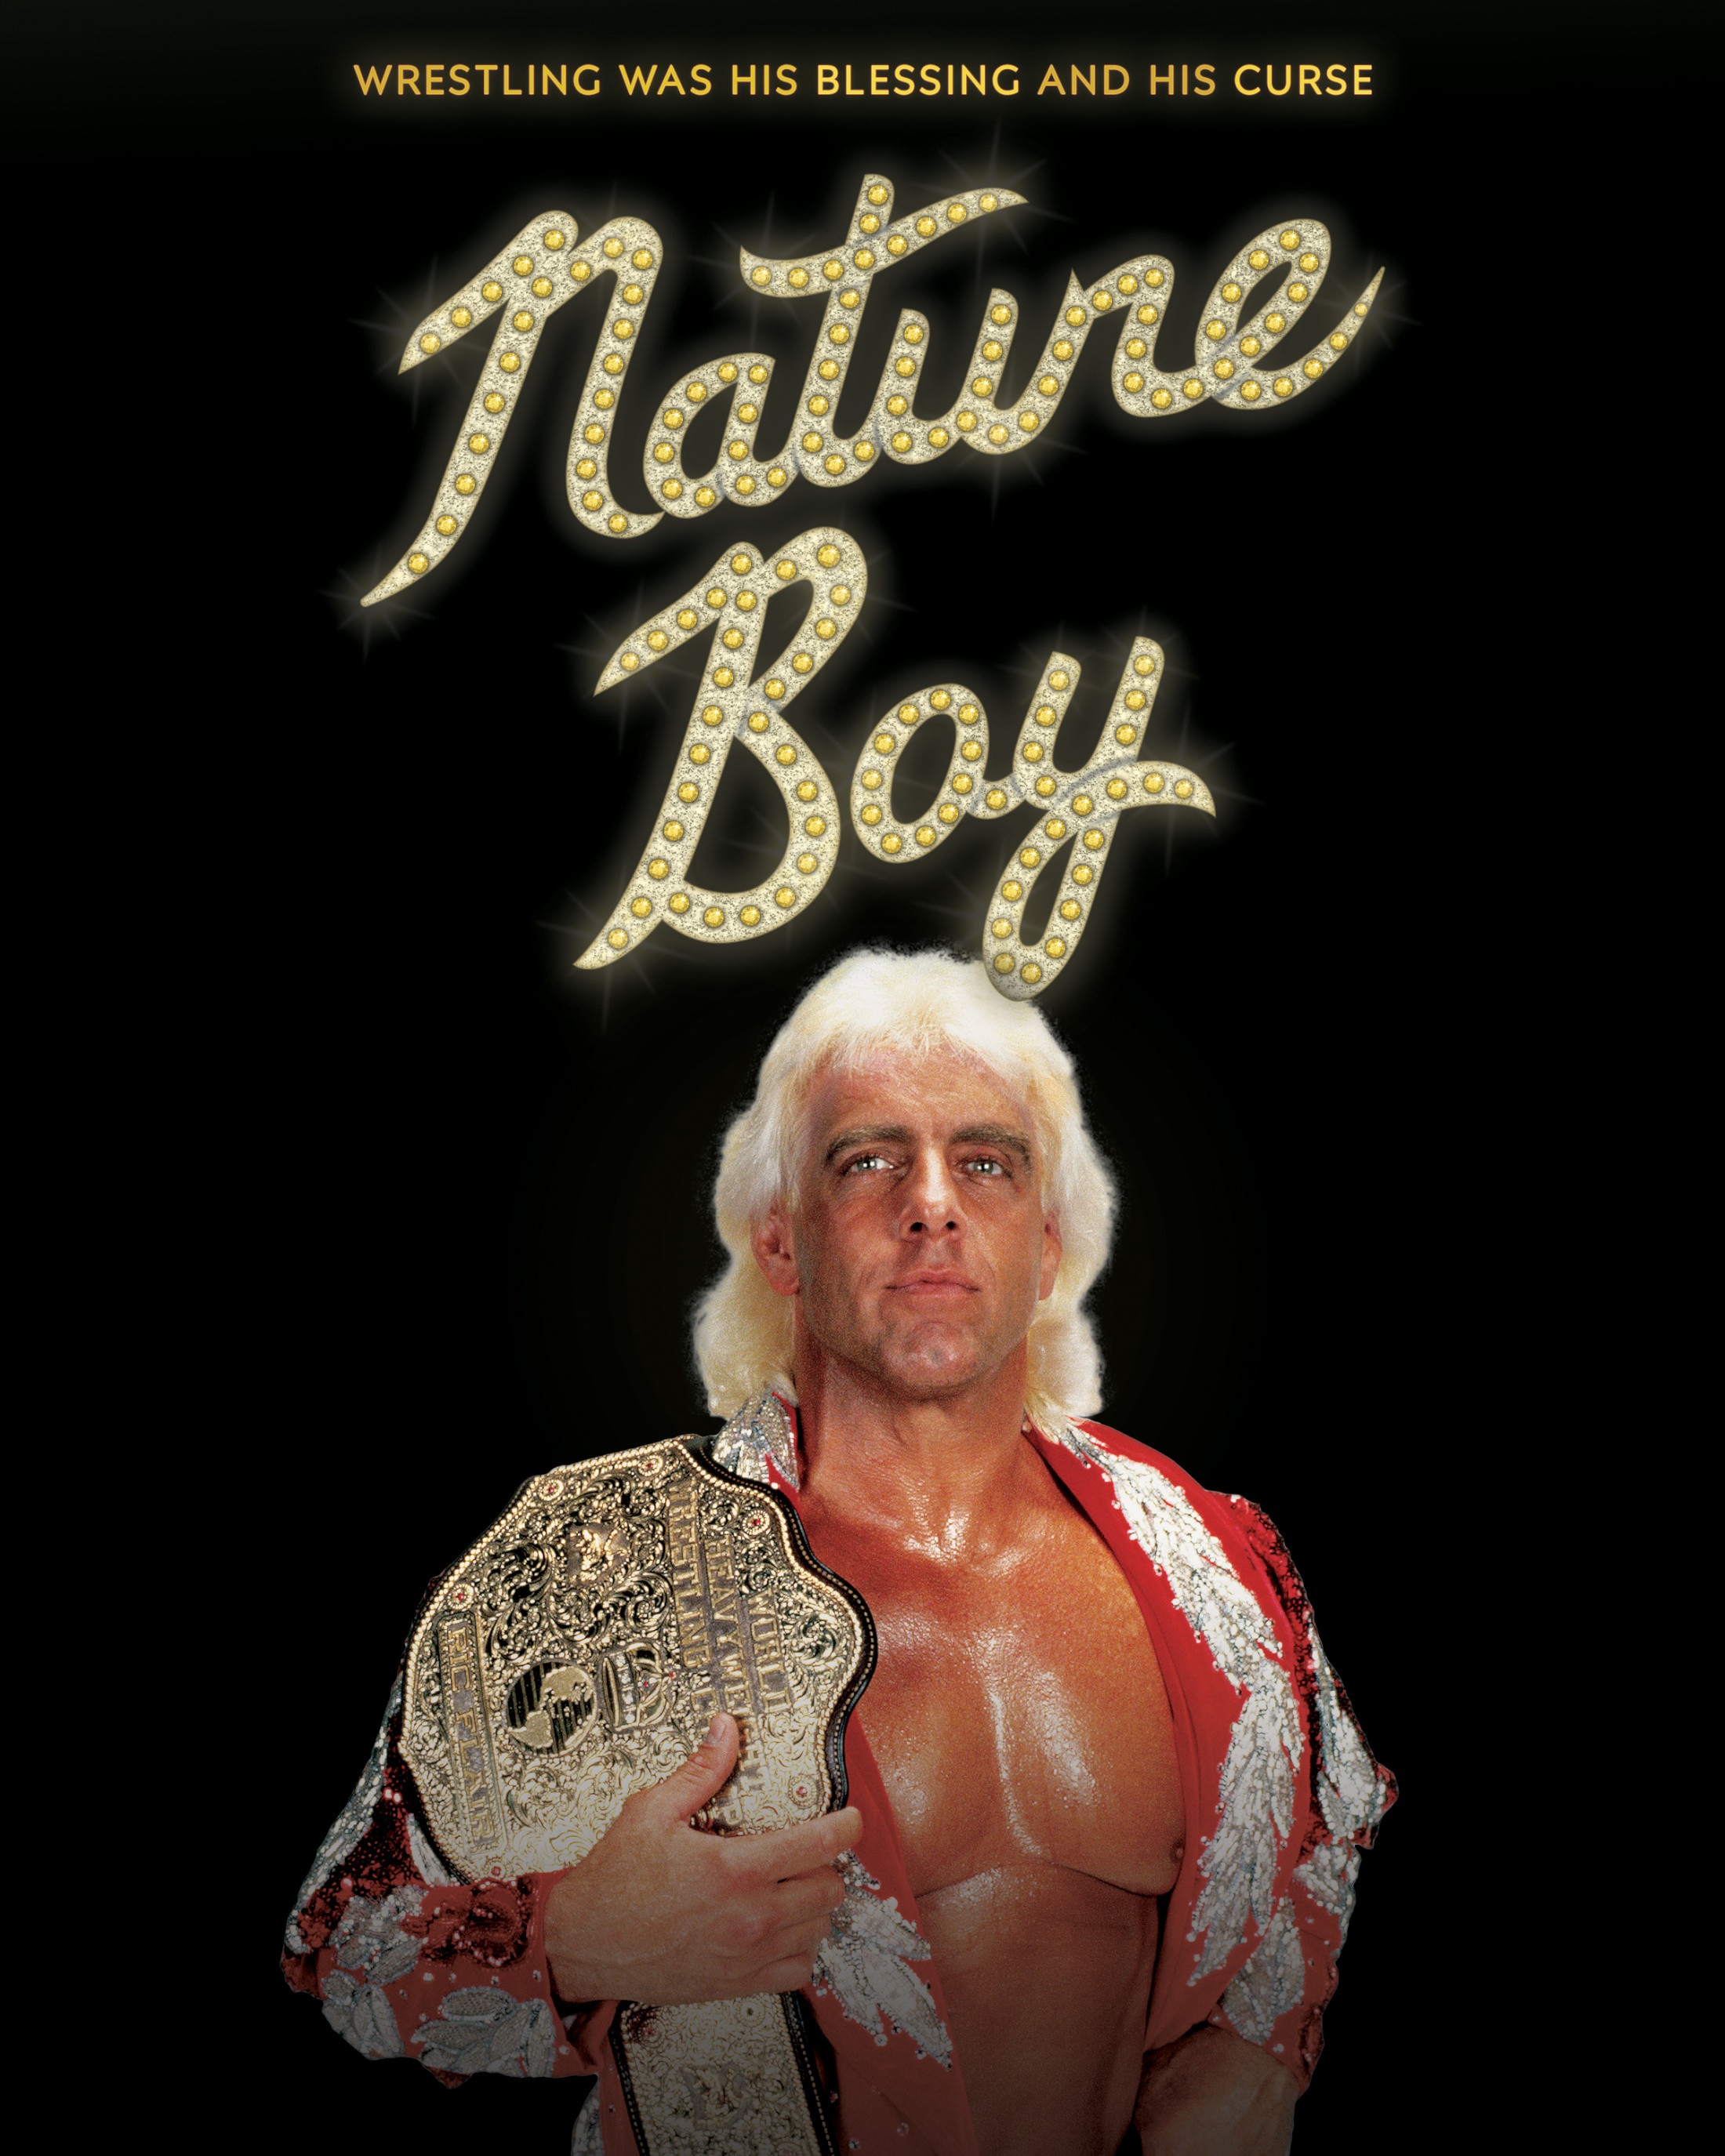 30 for 30: Nature Boy on Netflix